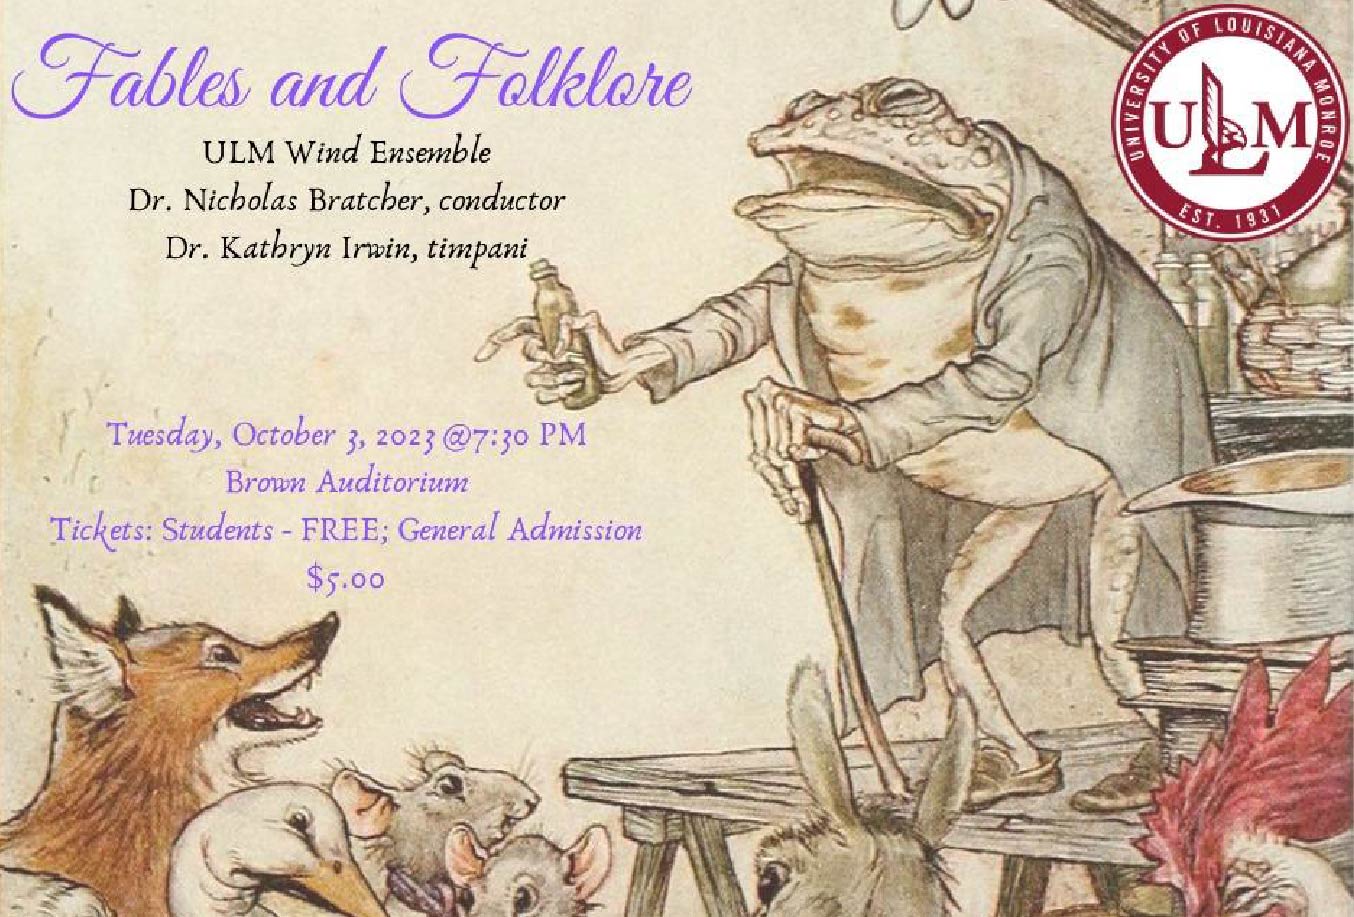 ULM Wind Ensemble presents "Fables and Folklore" on Oct. 3